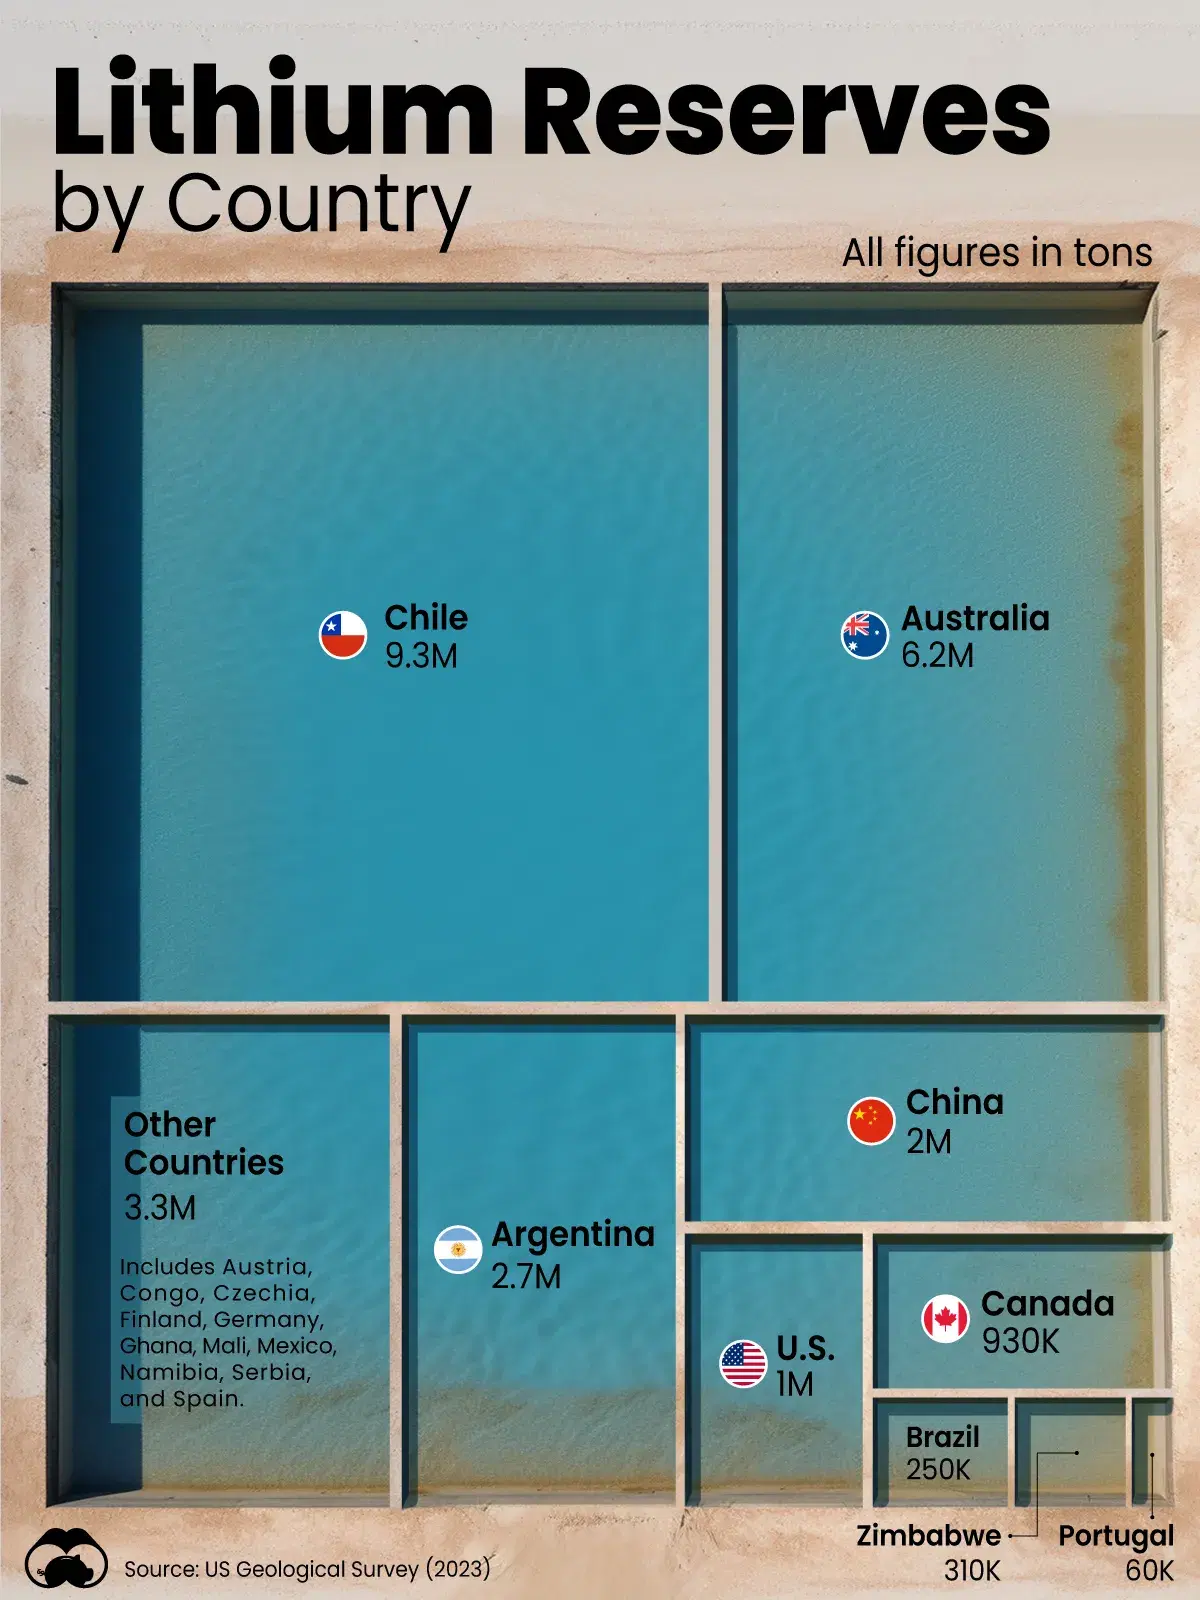 Chile and Australia Hold 60% of the World’s Lithium Reserves